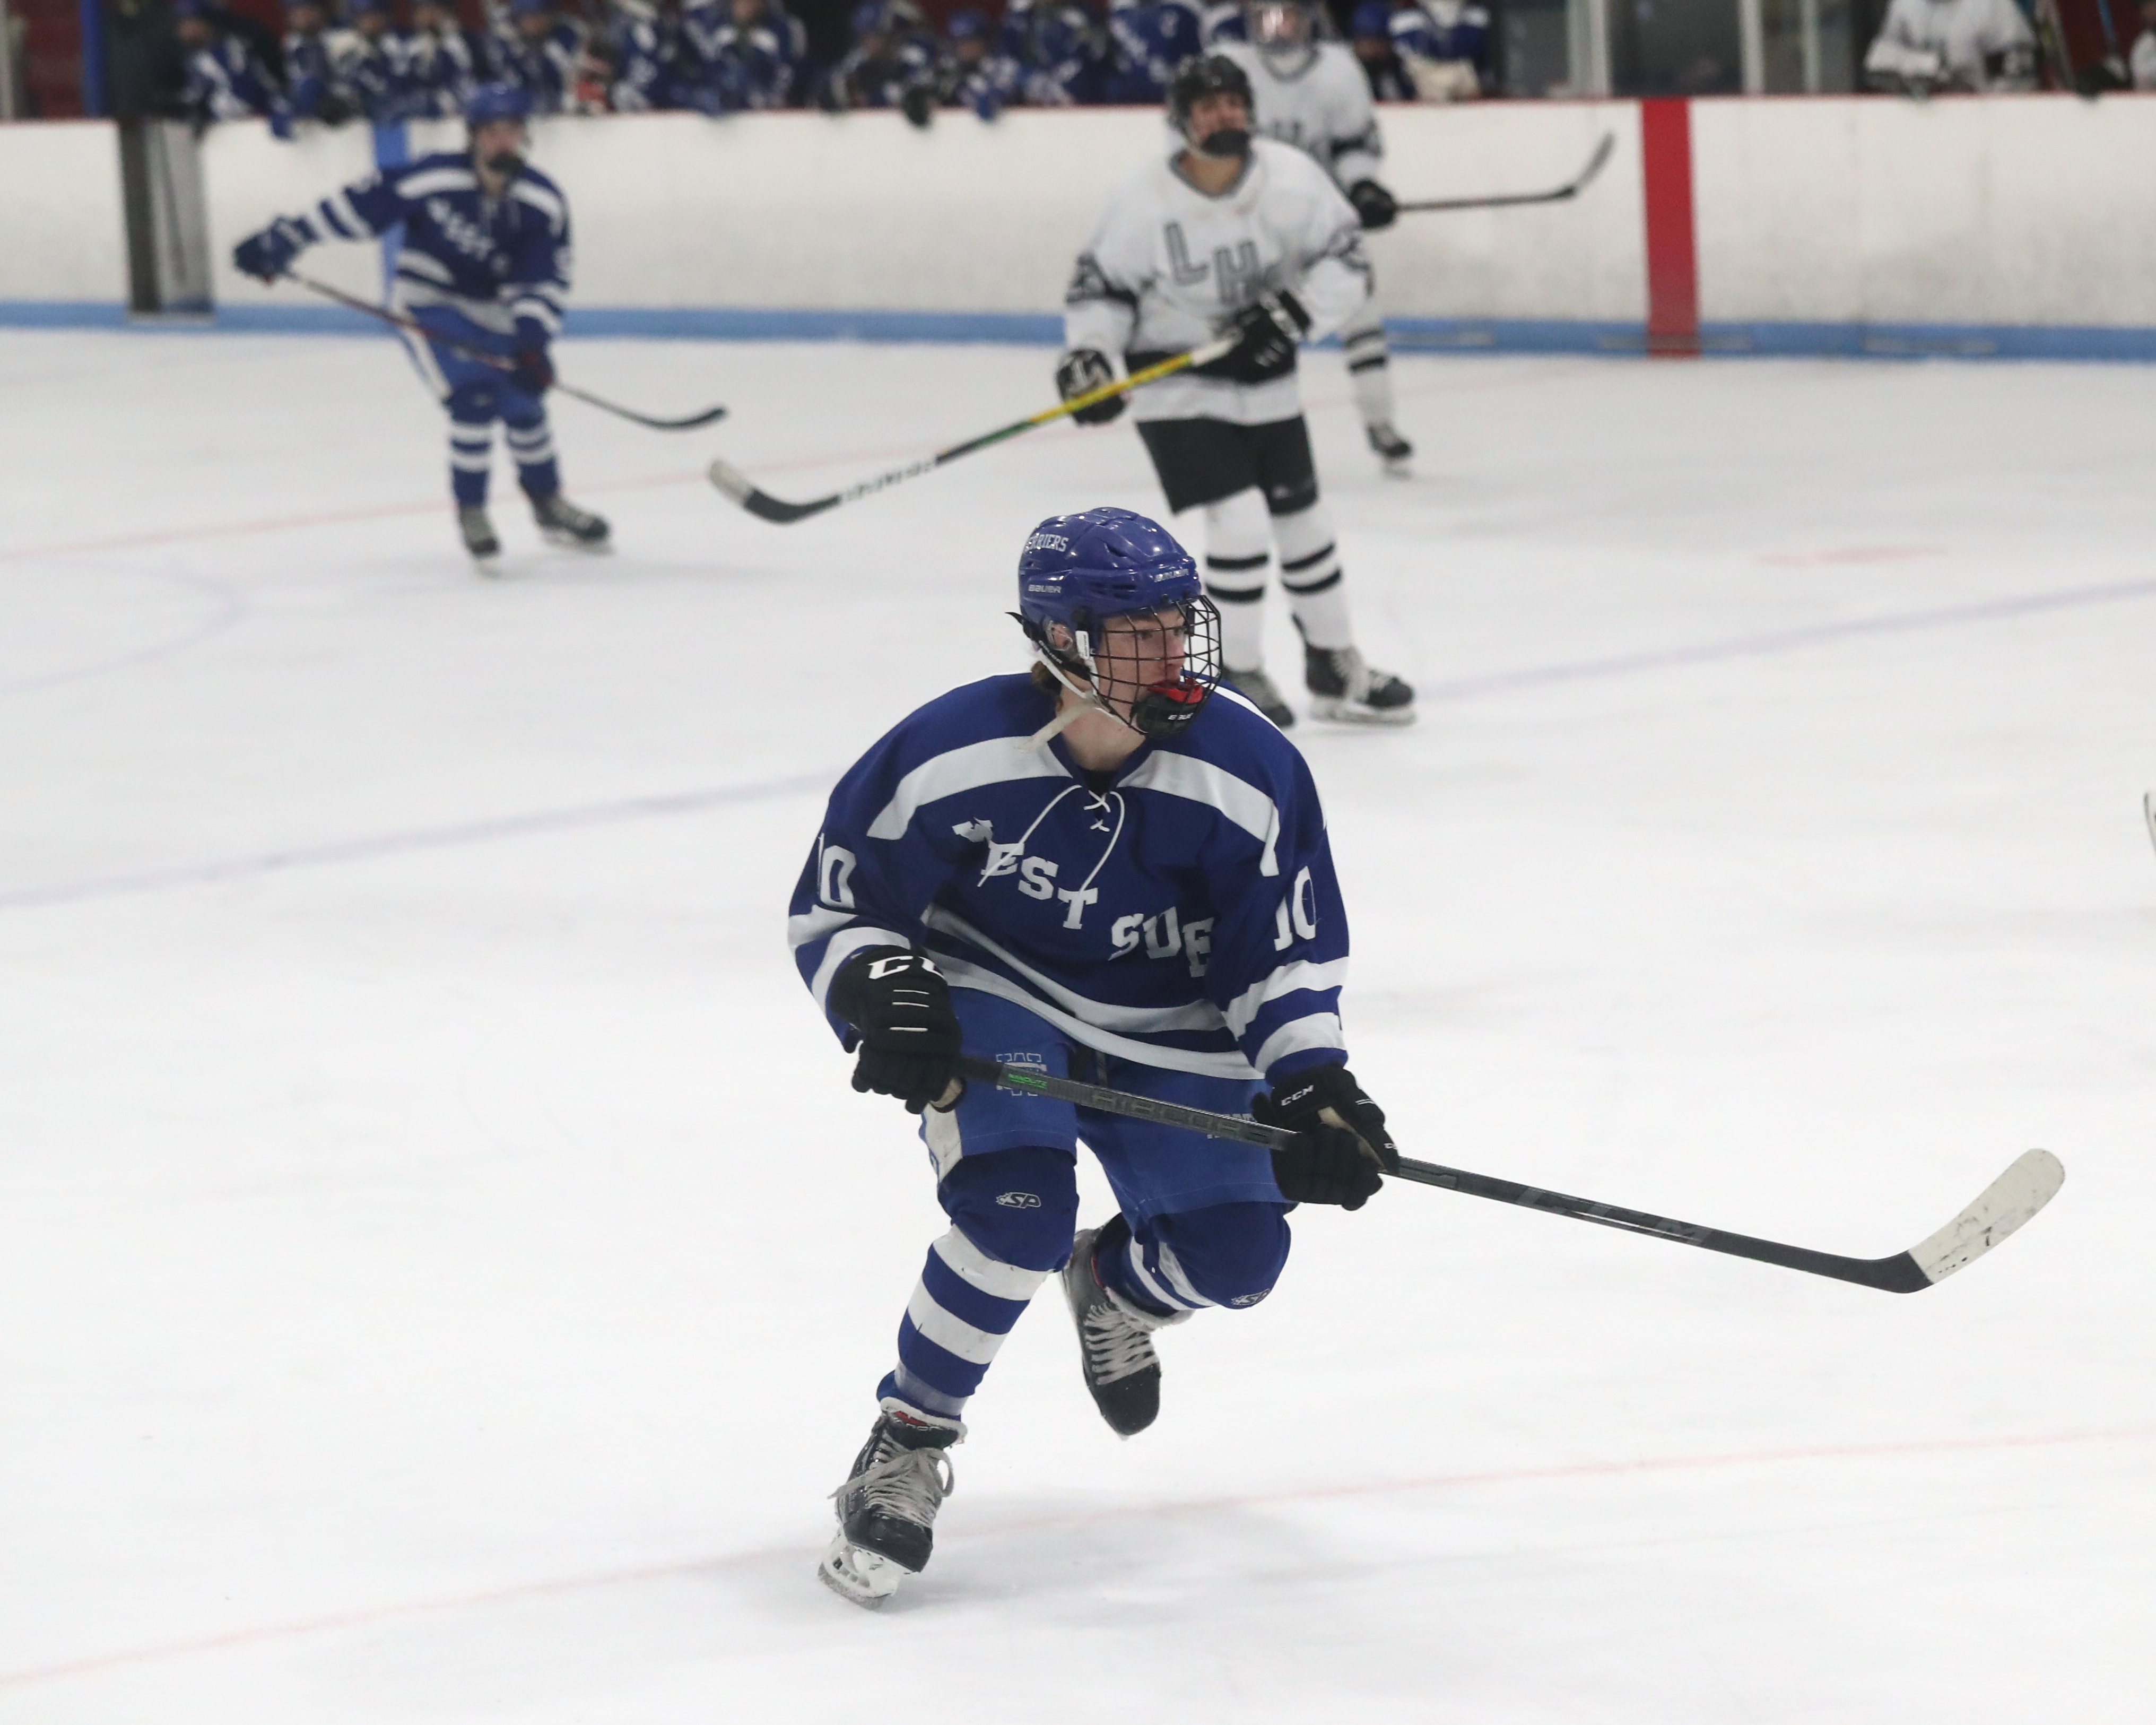 Strong second period leads No. 4 Longmeadow boys hockey past No. 3